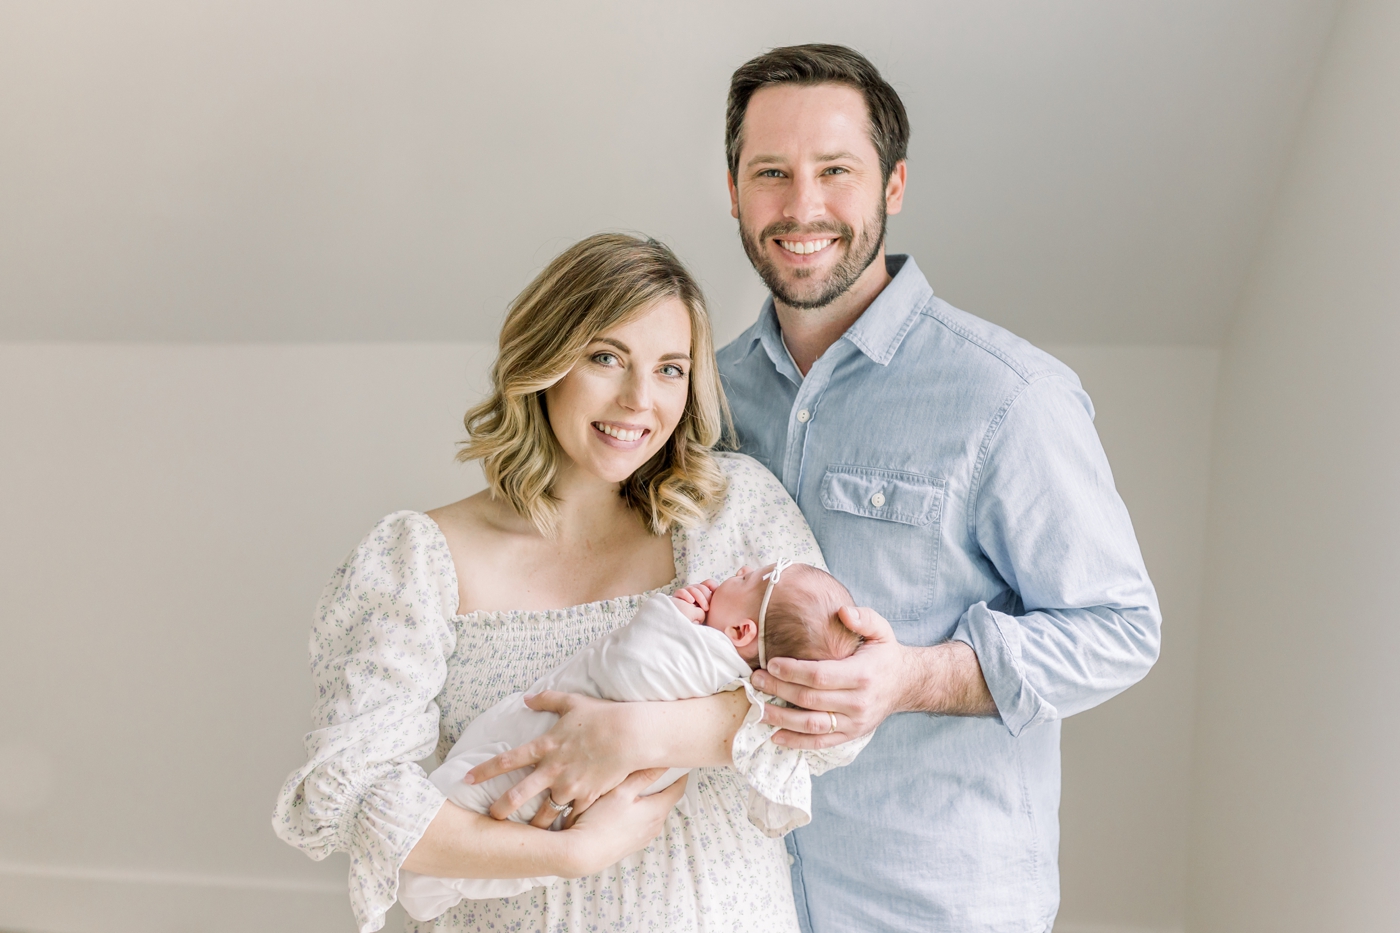 Mom, dad, and baby during newborn photos in Mount Pleasant | Photo by Caitlyn Motycka Photography.